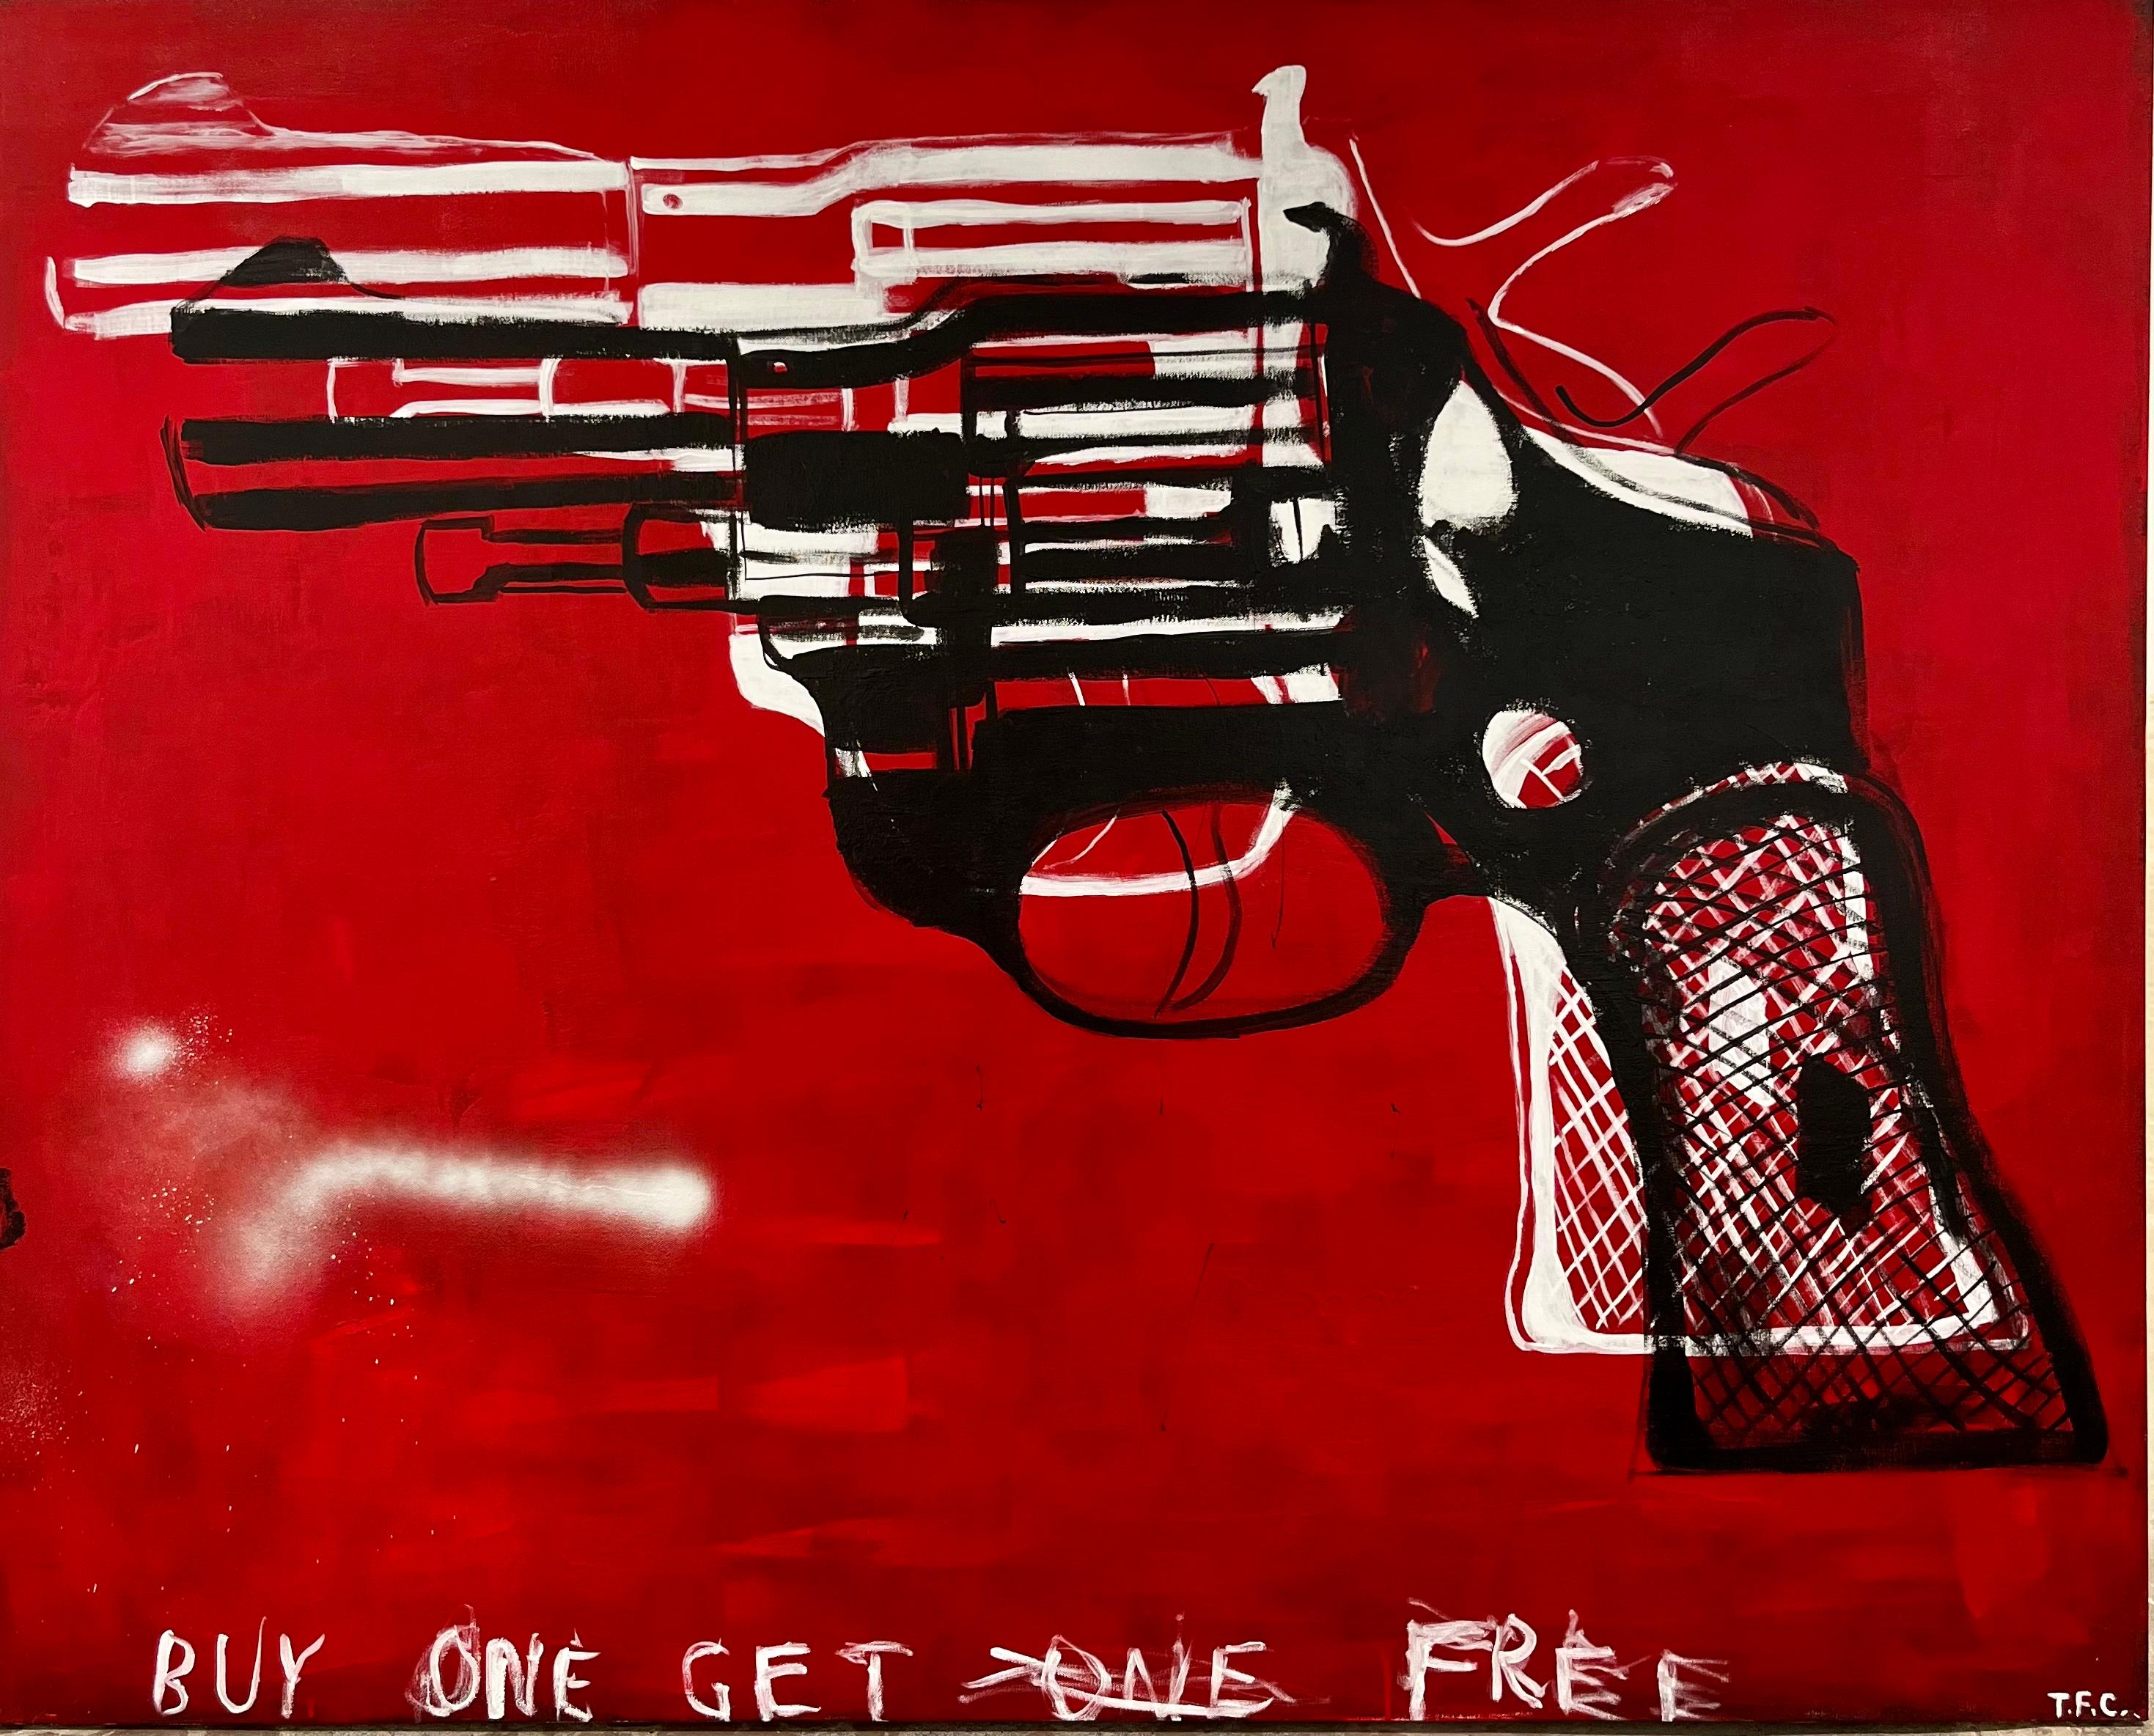 Tyler Casey Still-Life Painting - "Guns (Red)" Contemporary Abstract Andy Warhol Inspired Pop Art Painting